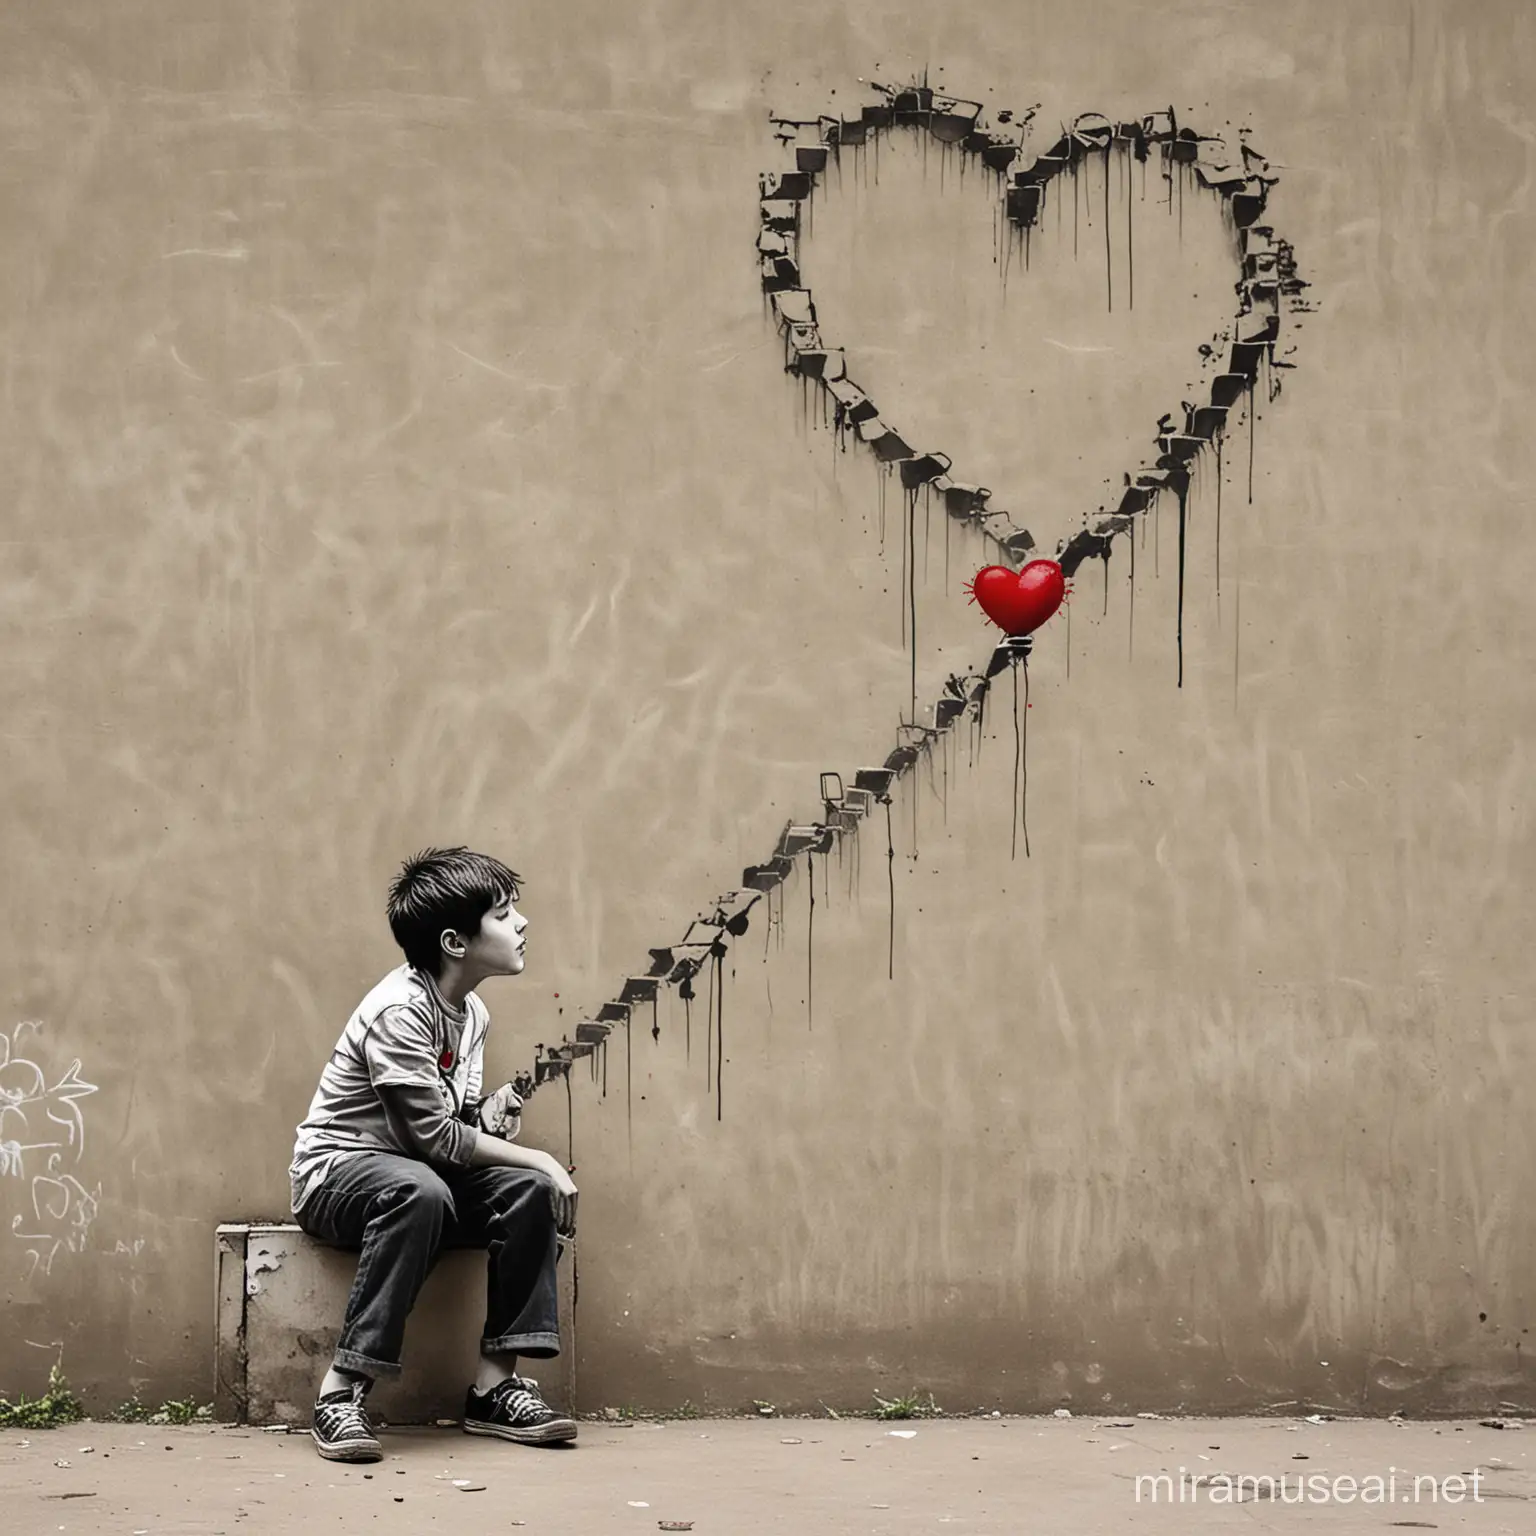 Boy Dreaming About Love in Banksy Style